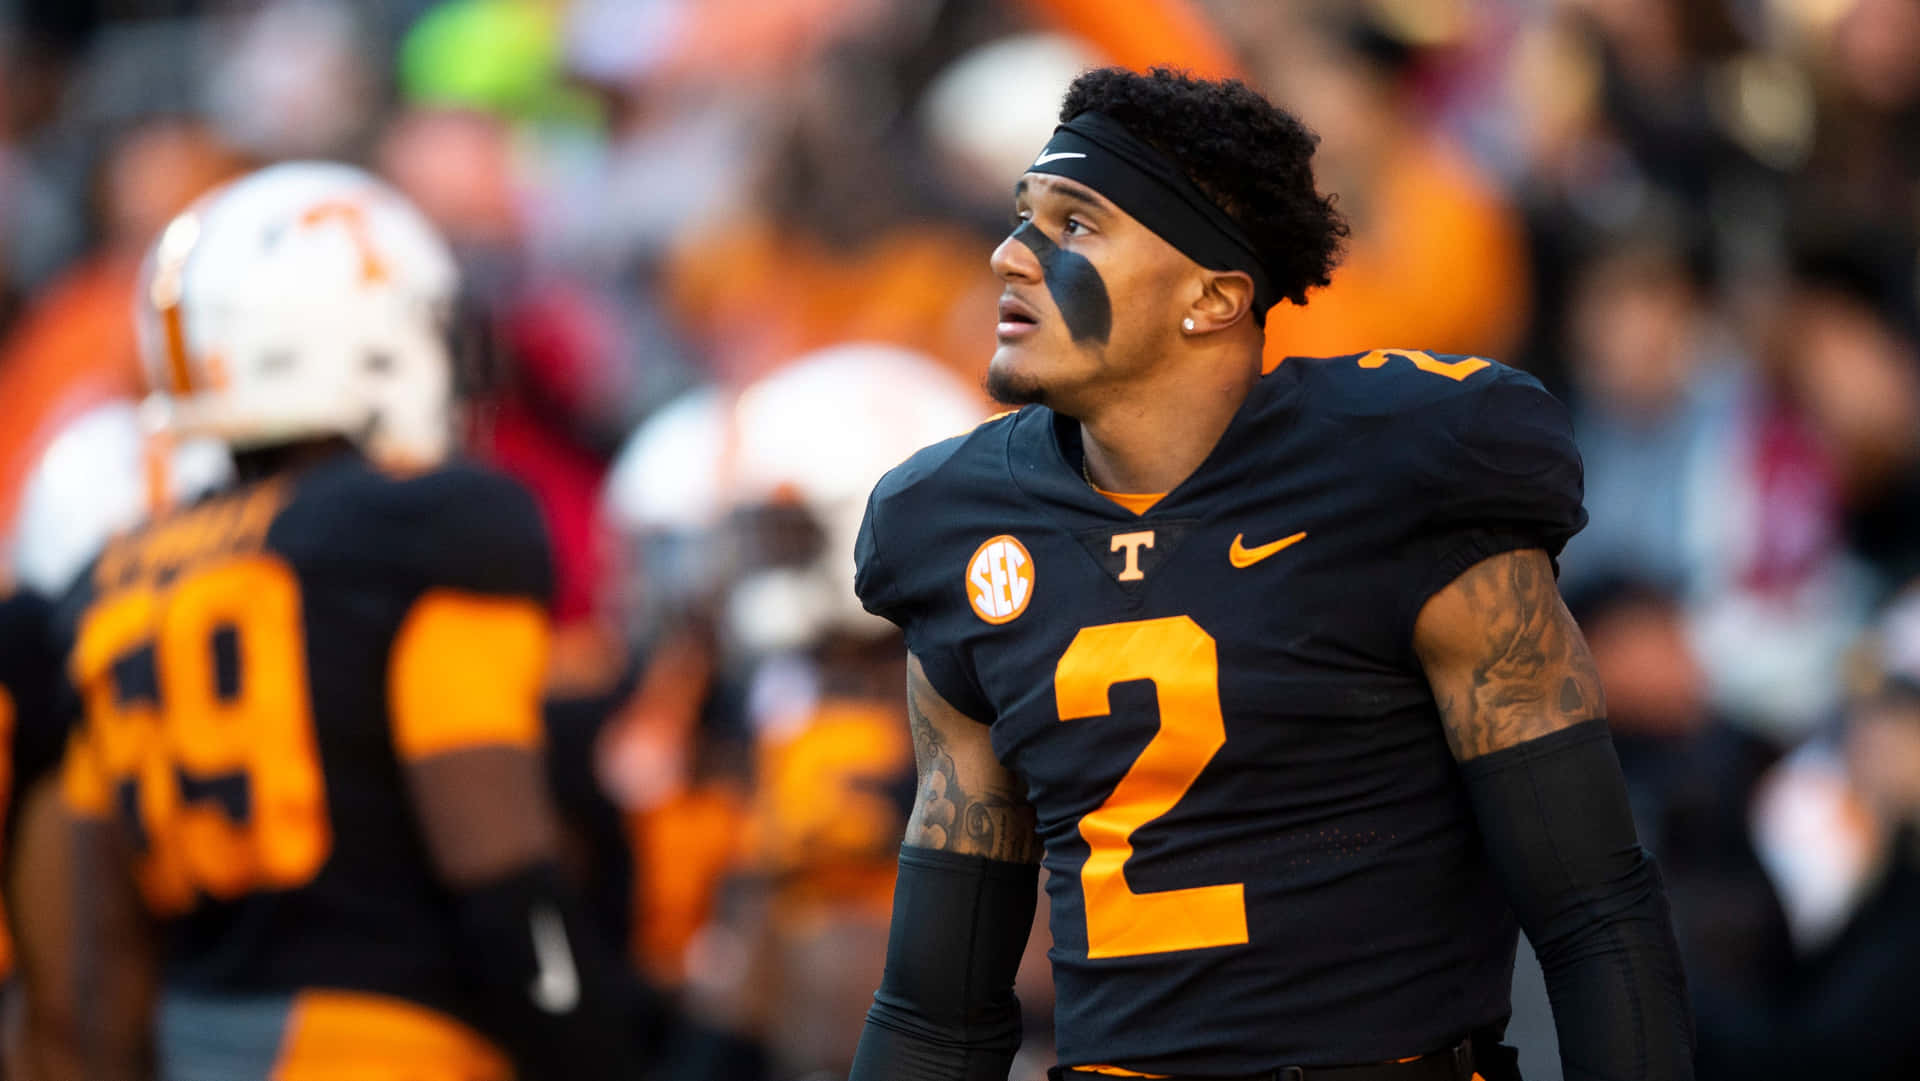 Alontae Taylor Tennessee Football Player Number2 Wallpaper